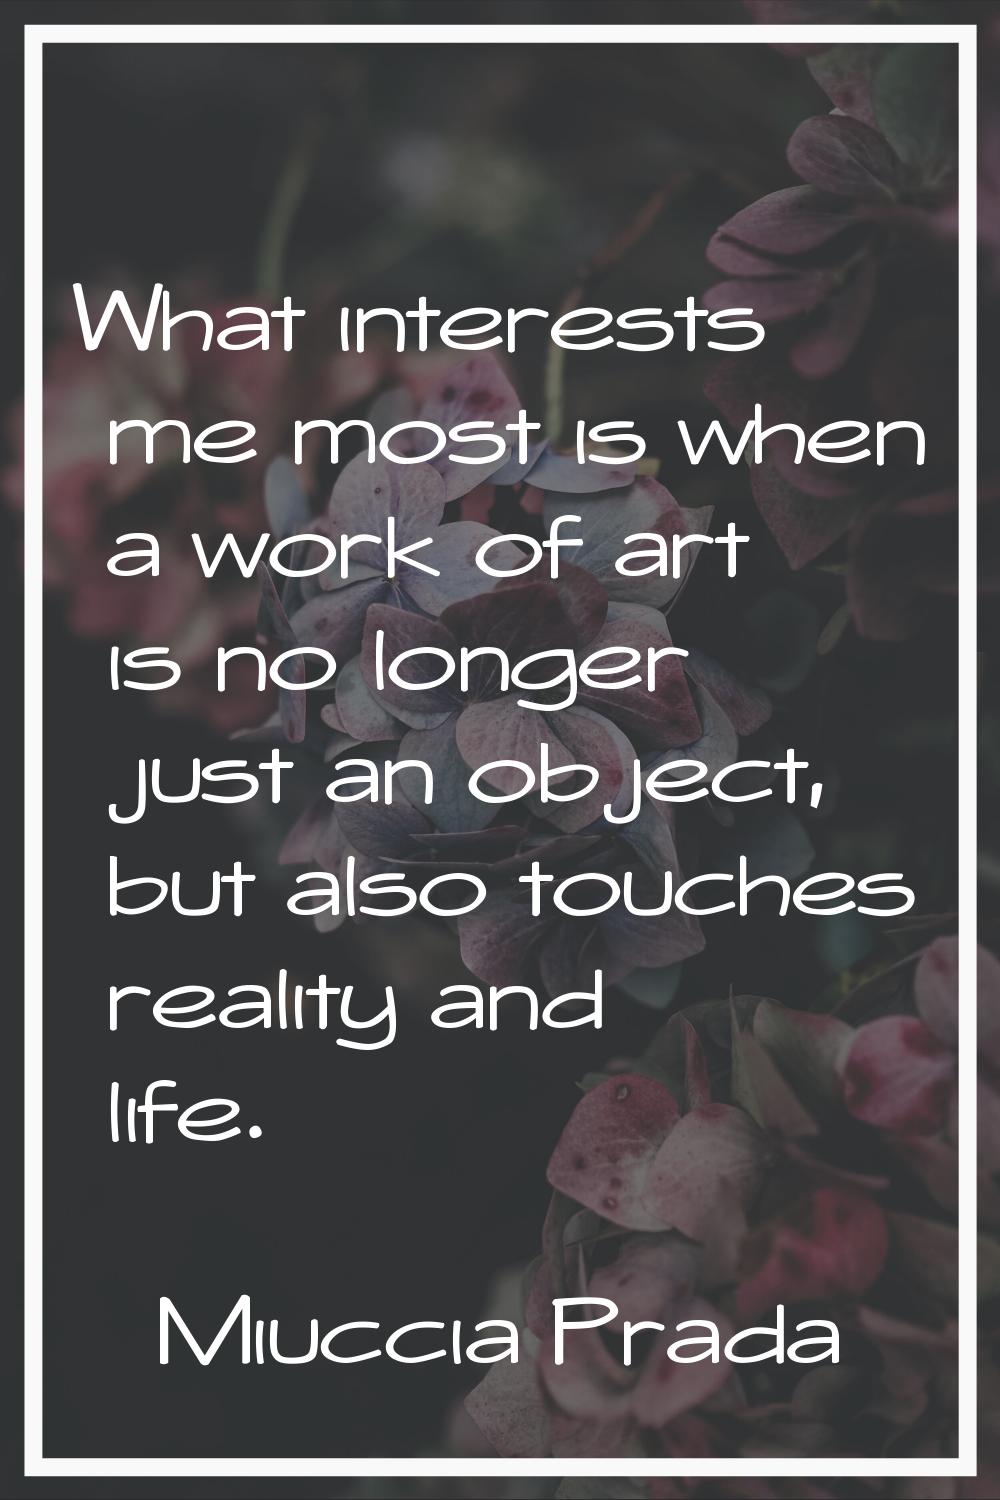 What interests me most is when a work of art is no longer just an object, but also touches reality 